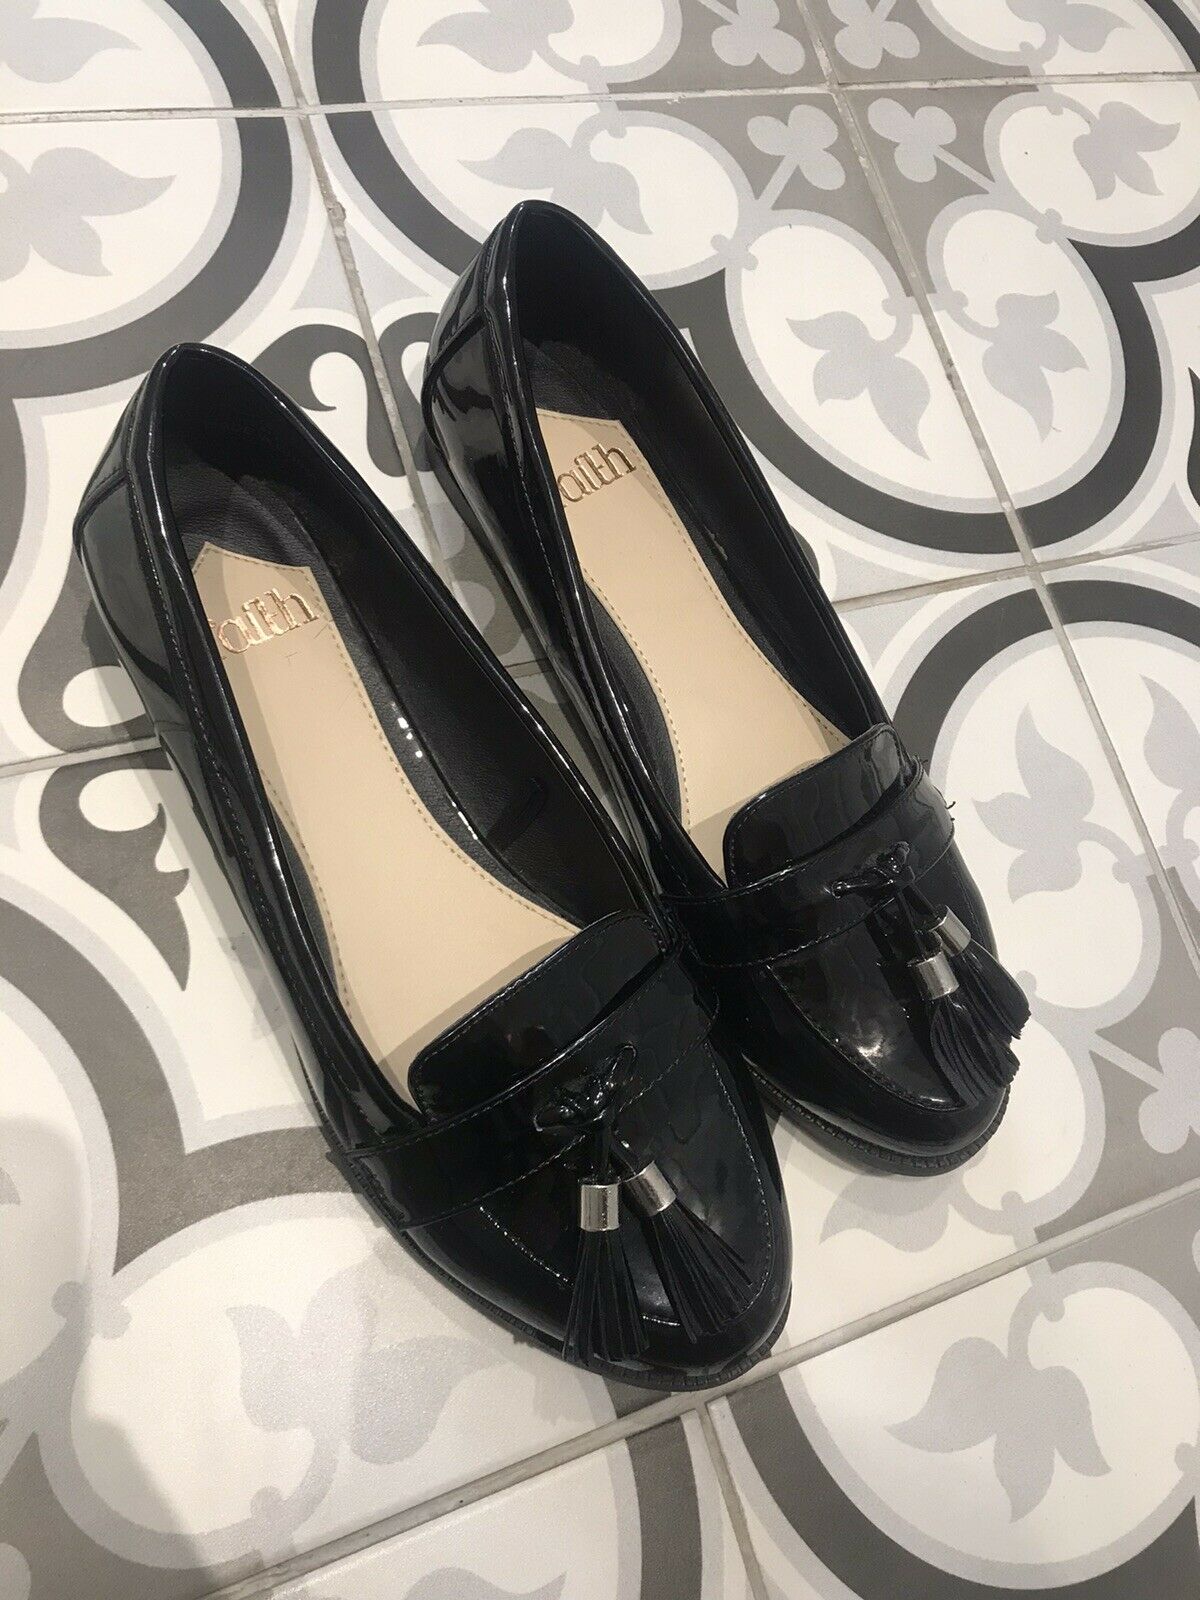 Faith Black Loafers Size UK 6 - Brand New